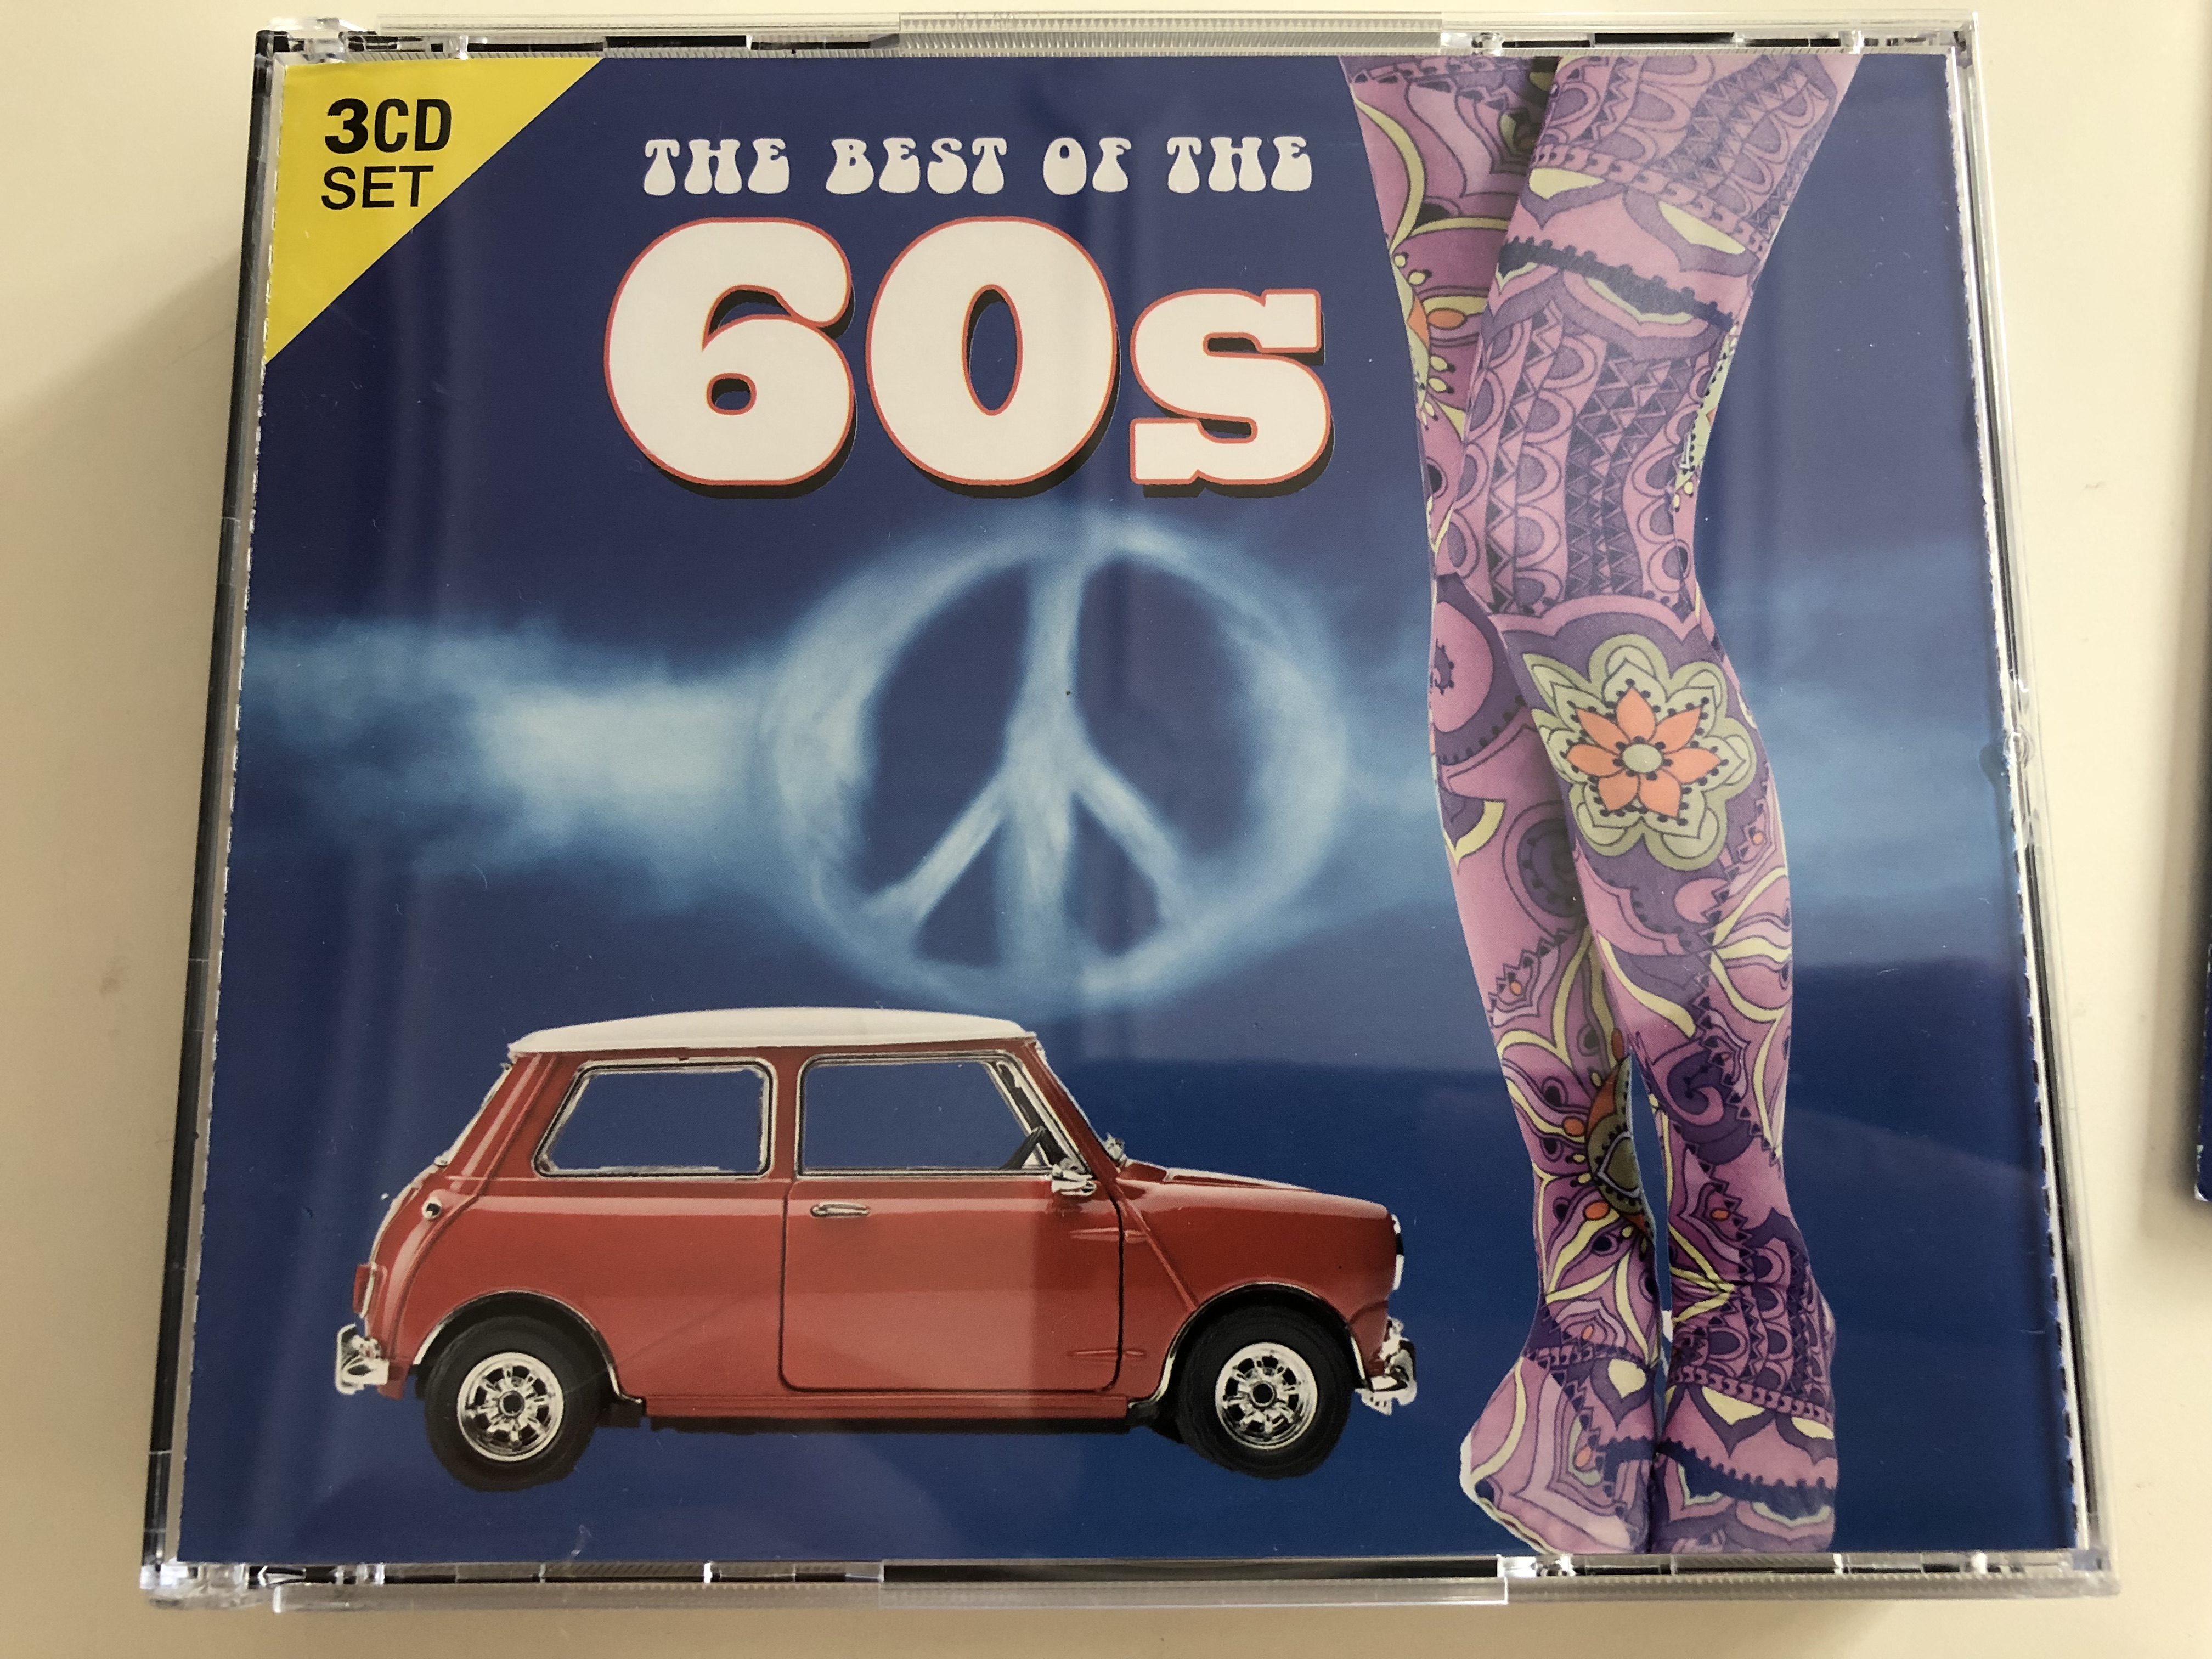 the-best-of-the-60s-the-uk-top-10-of-the-60s-the-sound-of-the-60s-3x-audio-cd-set-2008-play-3-003-1-.jpg